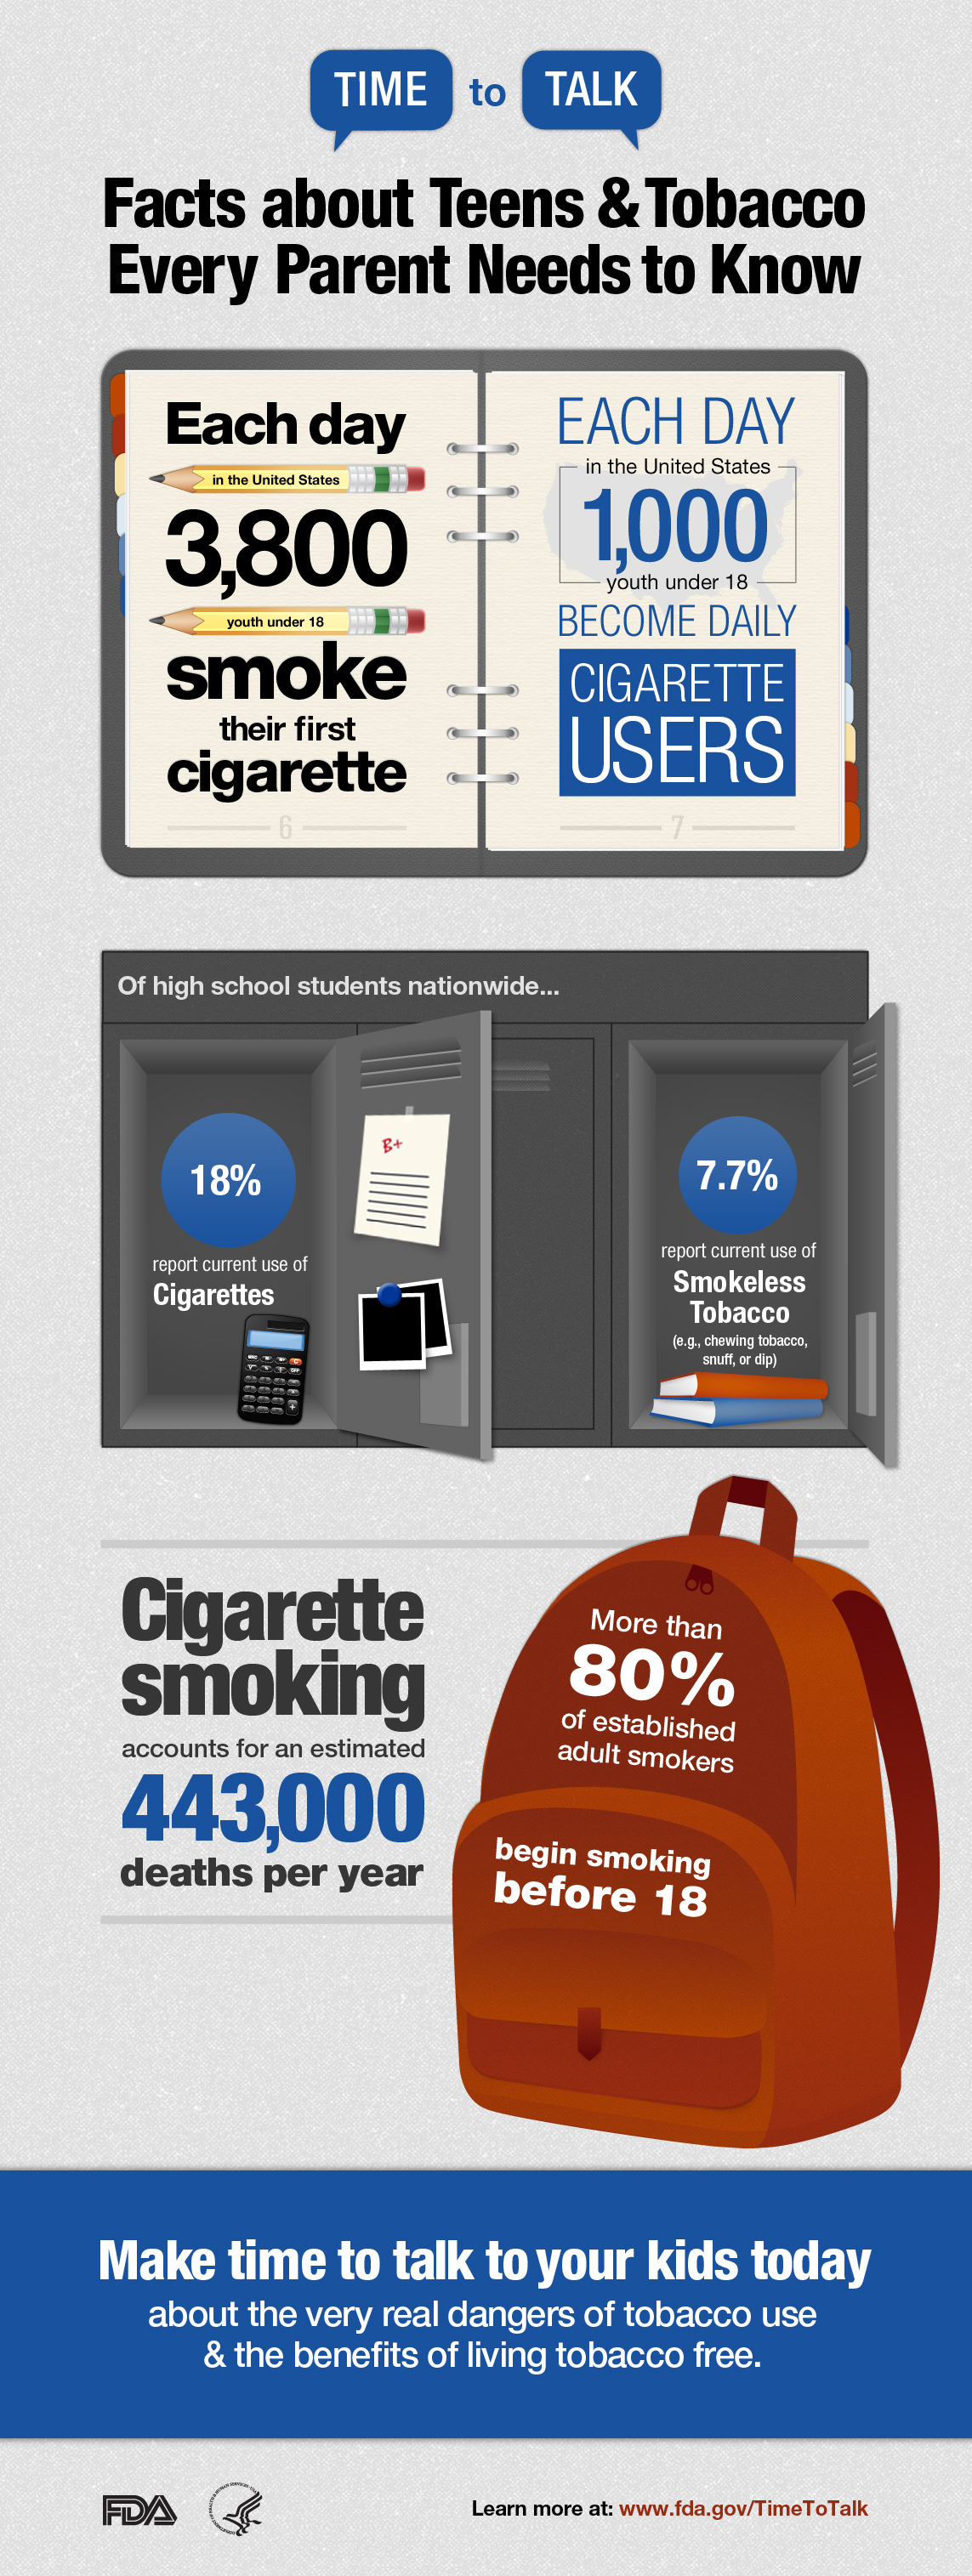 Each day in the U.S. 3,800 youth under 18 smoke their first cigarette and 1,000 youth under 18 become daily cigarette users. Of U.S. high school students, 18% report current use of cigarettes and 7.7% report current use of smokeless tobacco. Cigarette smoking accounts for an estimated 443,000 deaths per year. More than 80% of established adult smokers begin before 18. Talk to your kids today about the dangers of tobacco use and the benefits of living tobacco free.  www.fda.gov/TimeToTalk